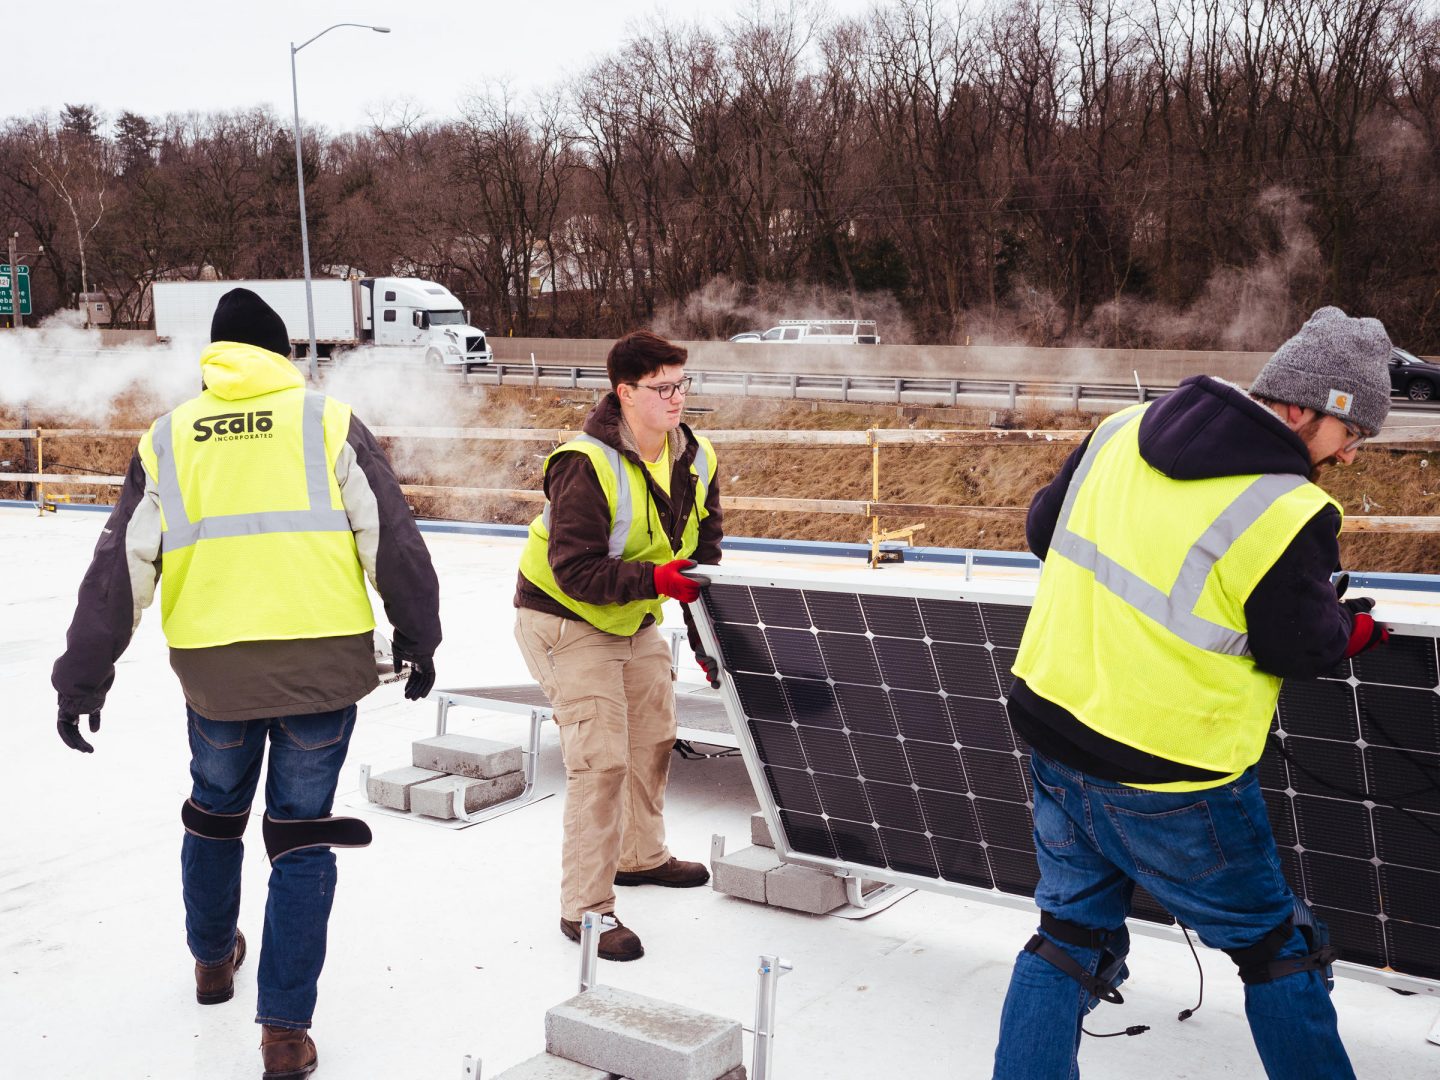 Workers install solar panels on the roof of Global Links, a medical relief nonprofit, in Green Tree, Pa., on Wednesday, Feb. 5, 2020.